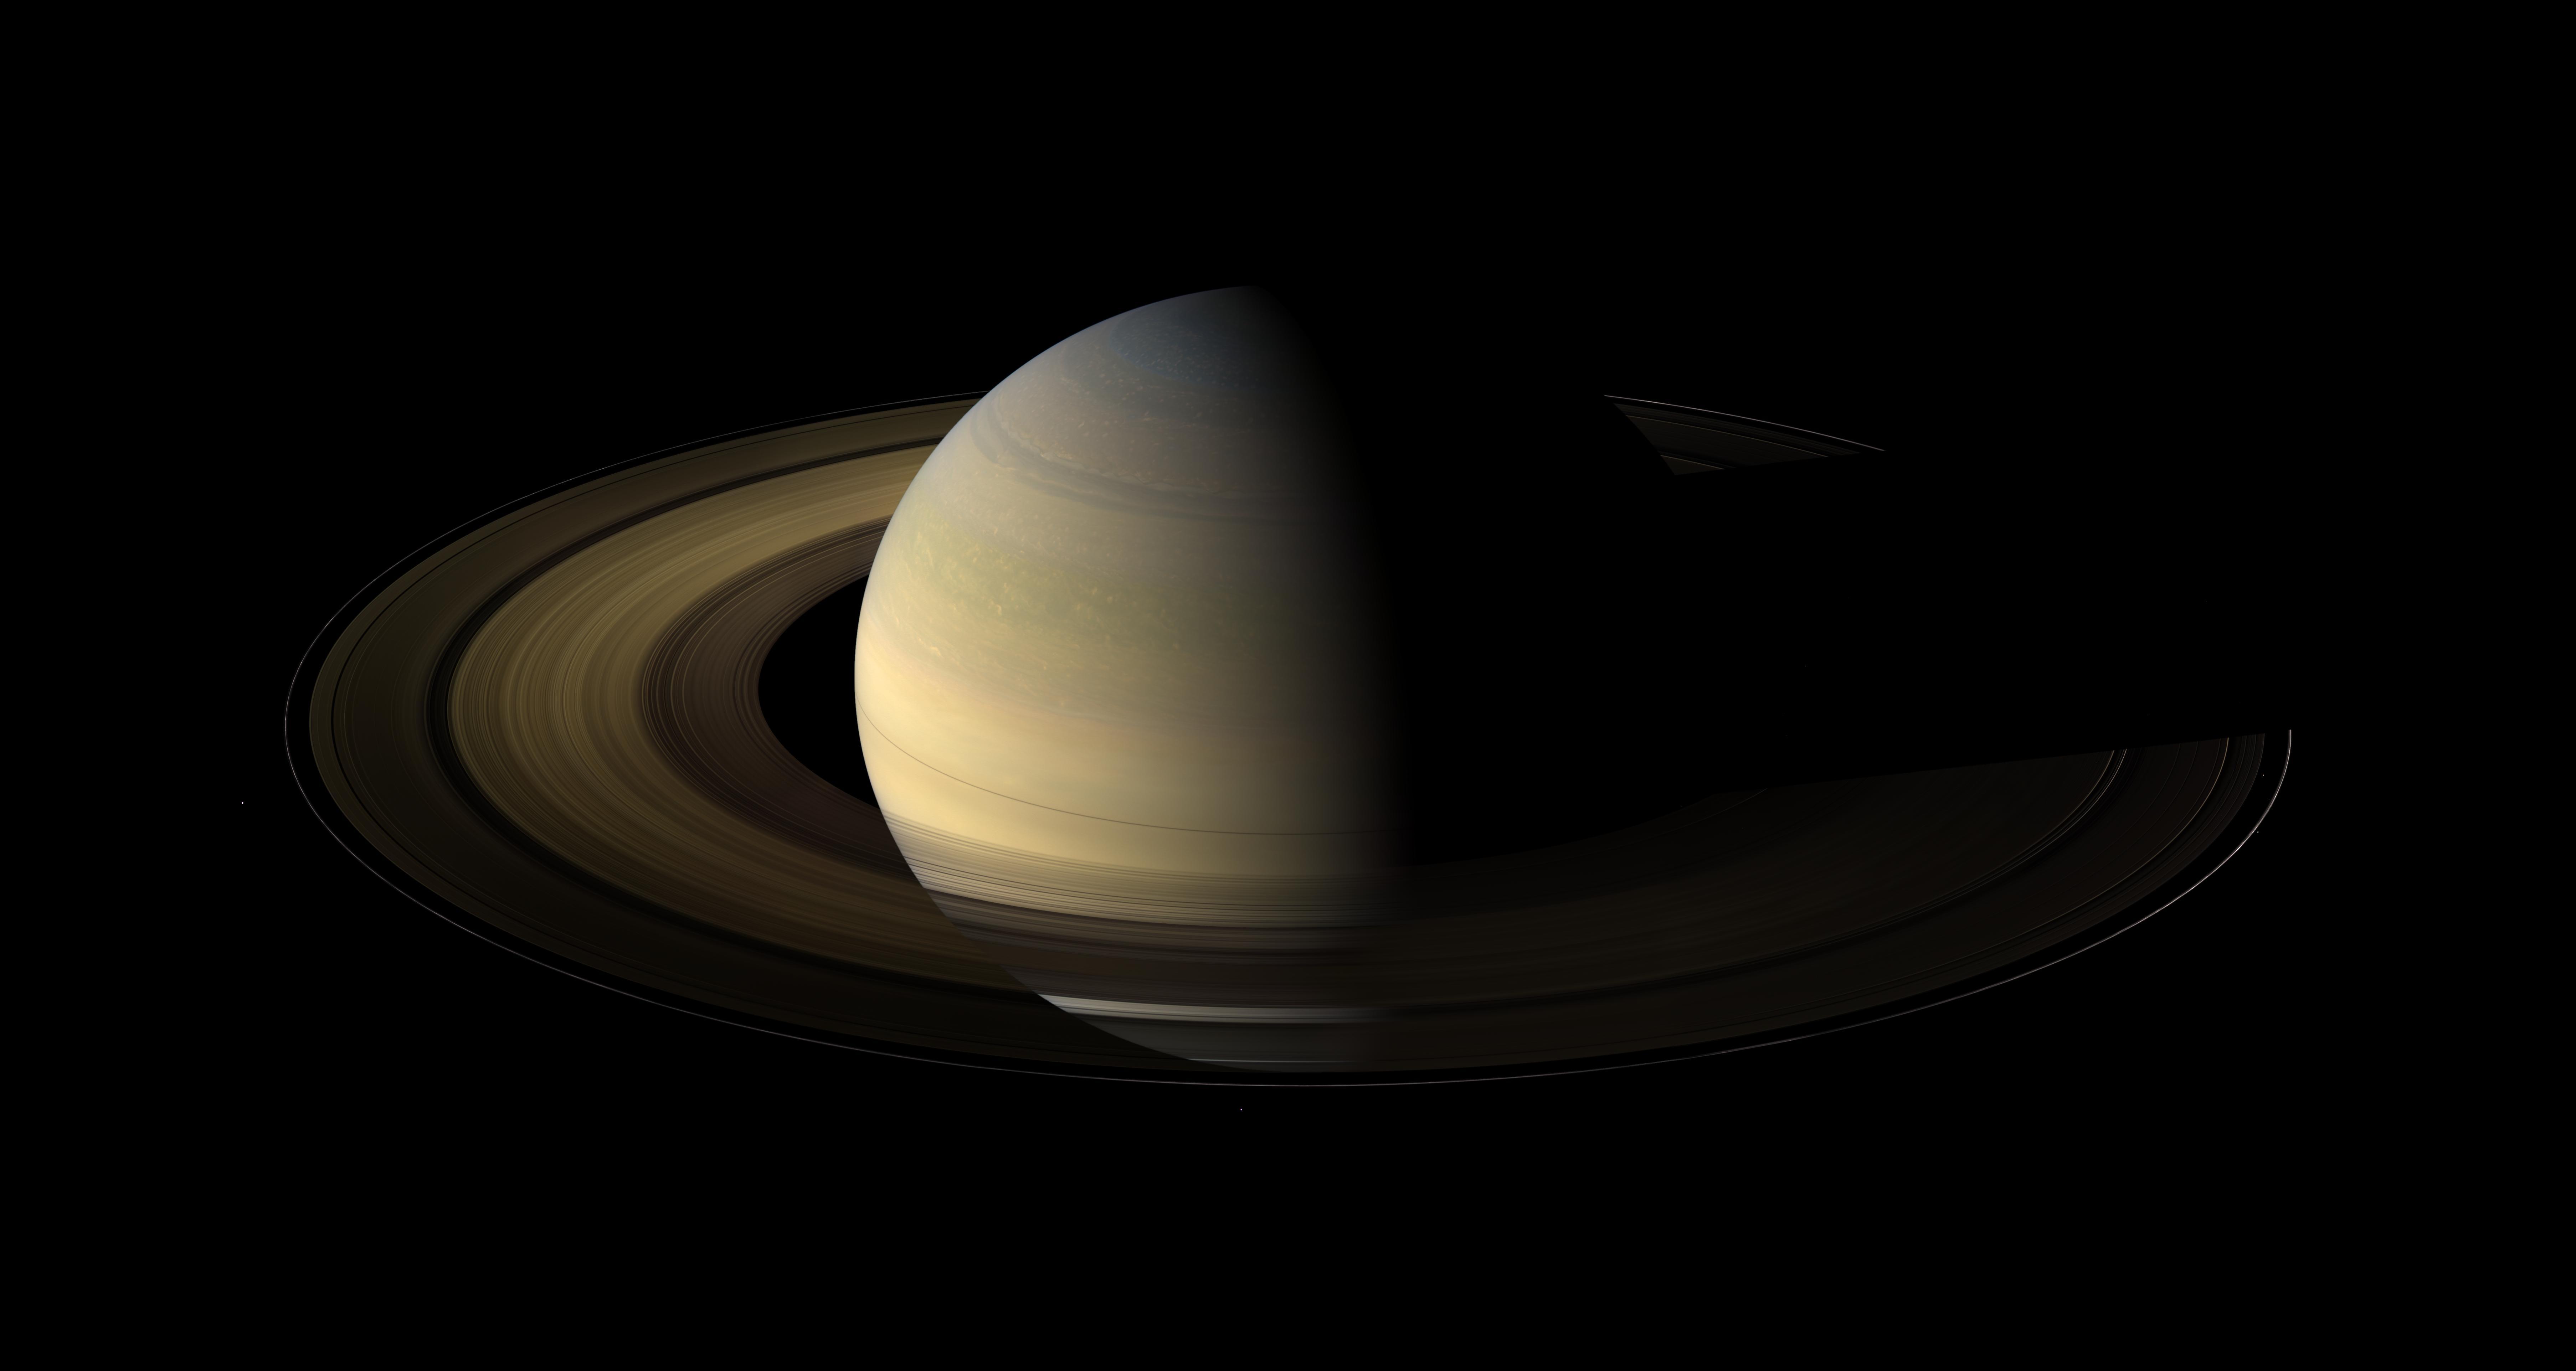 At Saturn, One of These Rings is not like the Others | NASA